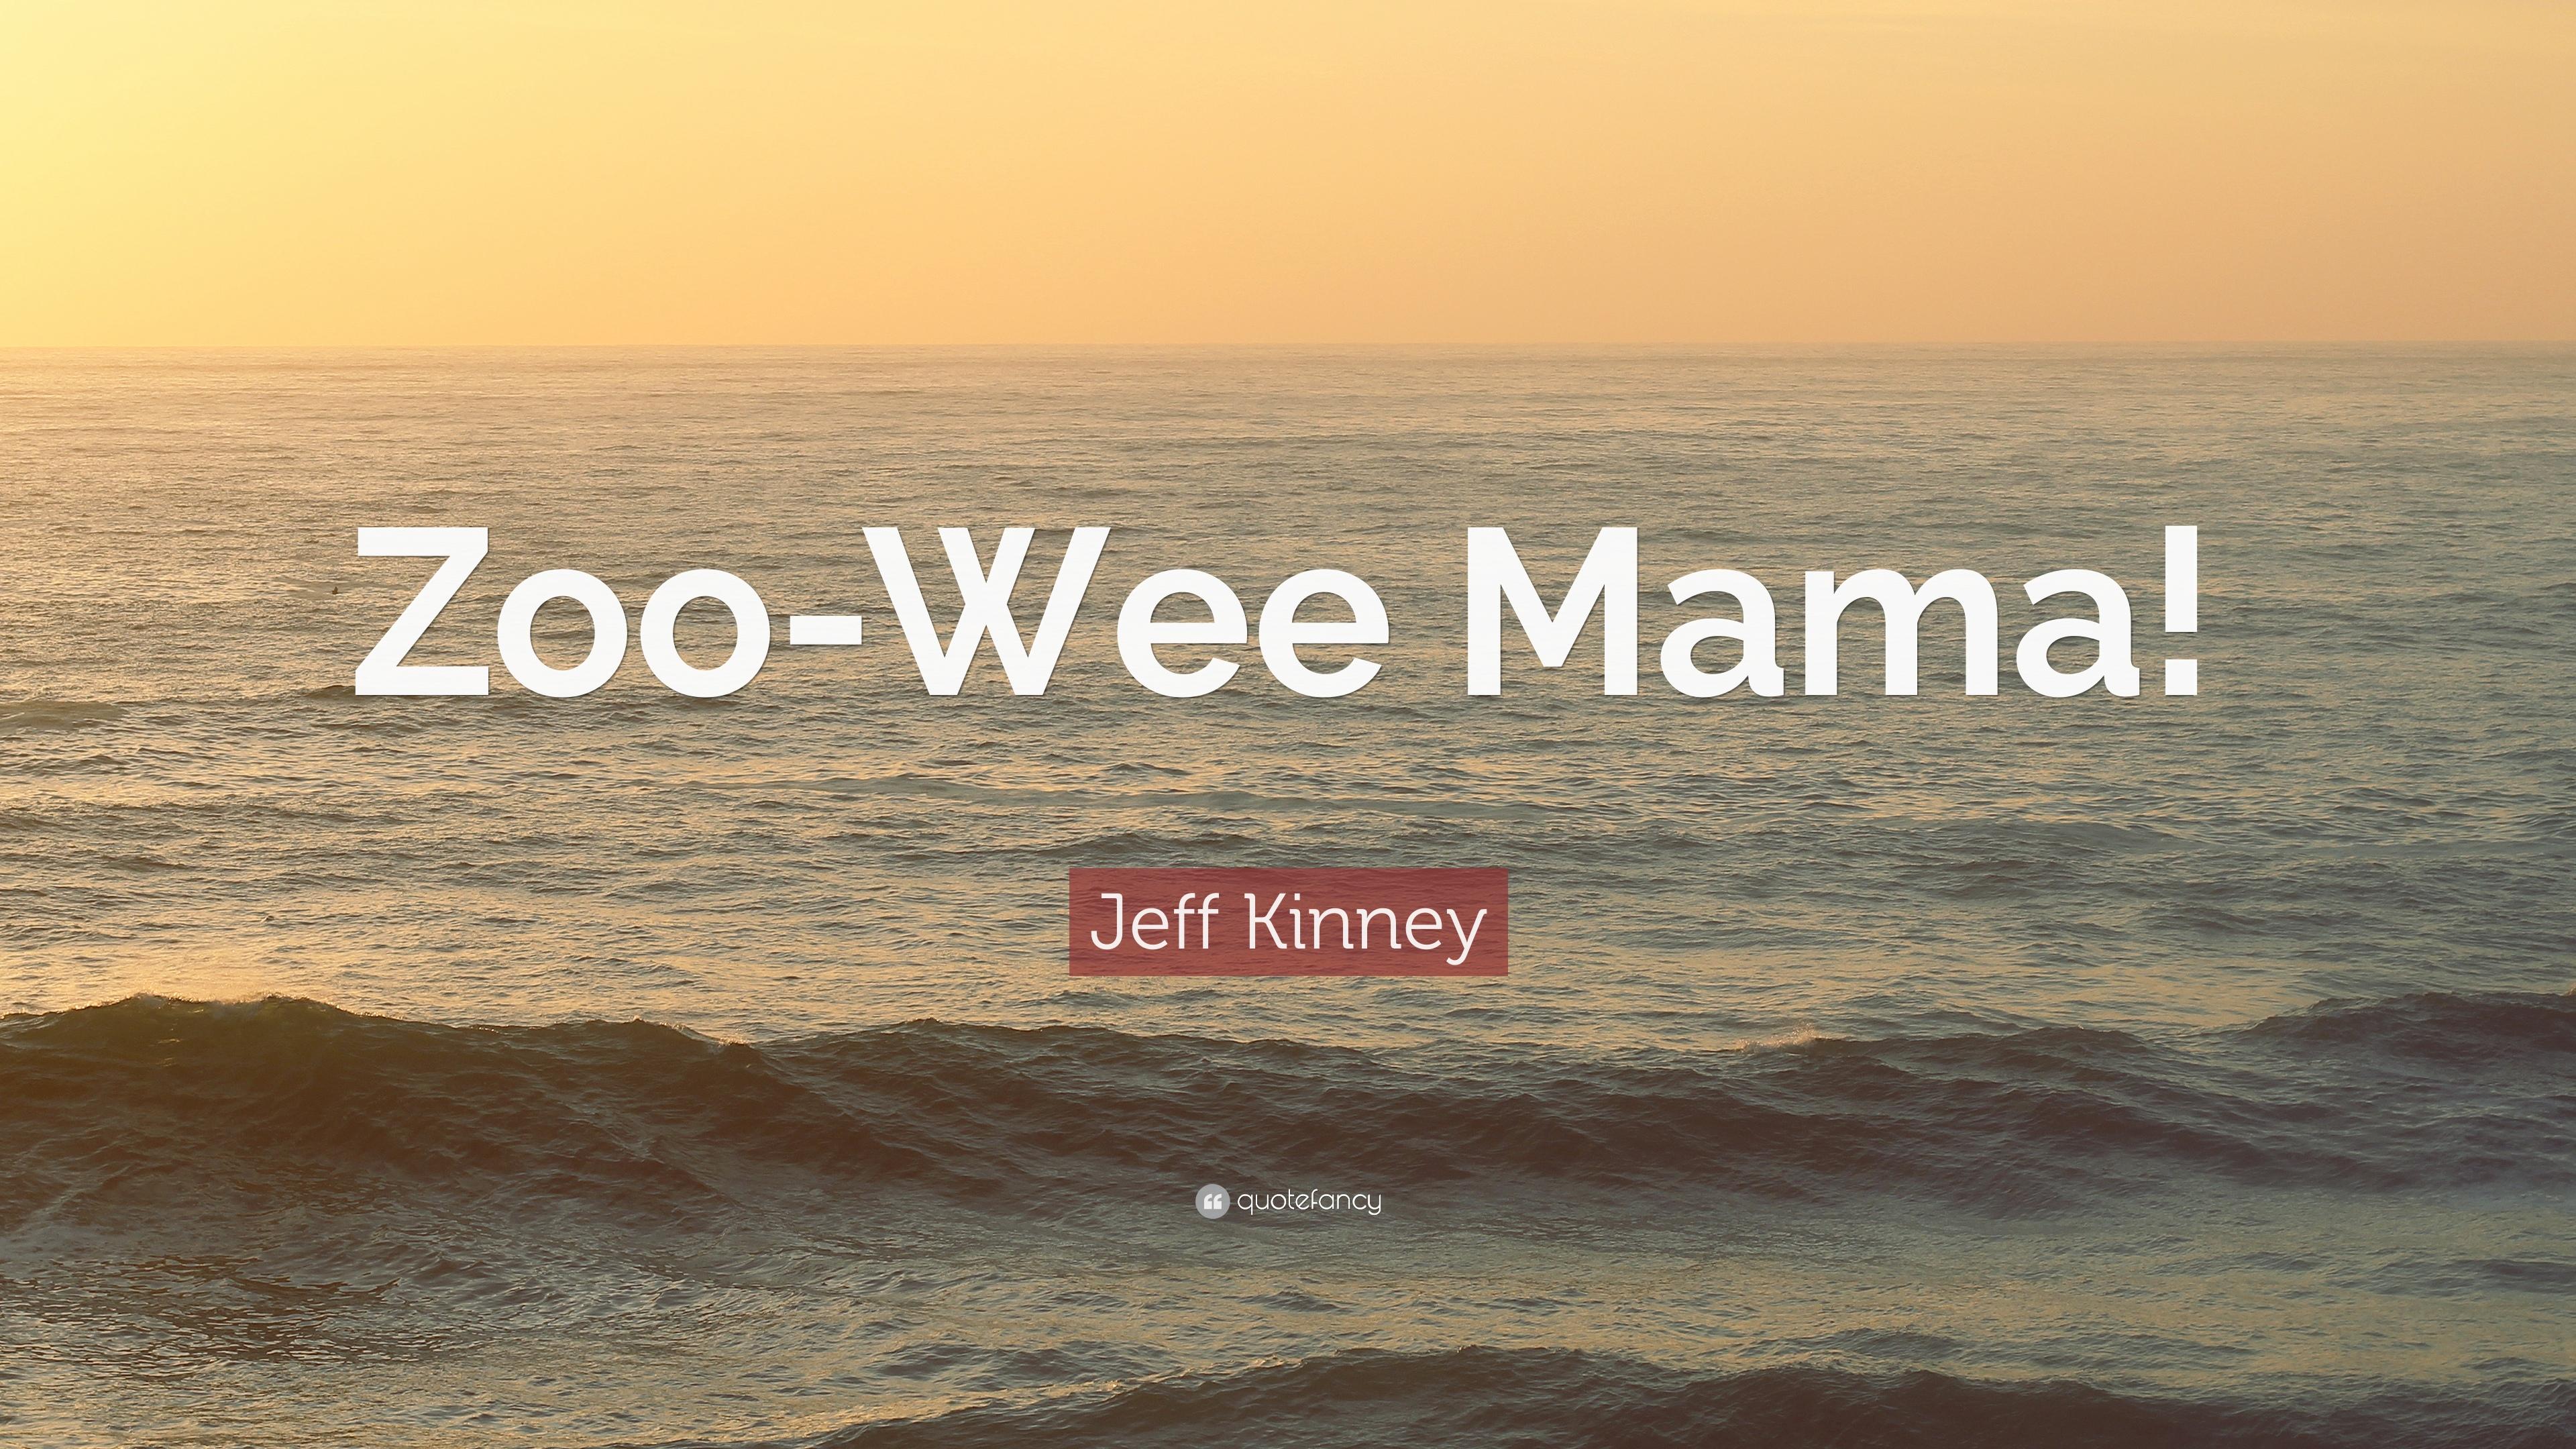 Jeff Kinney Quote: “Zoo Wee Mama!” (12 Wallpaper)